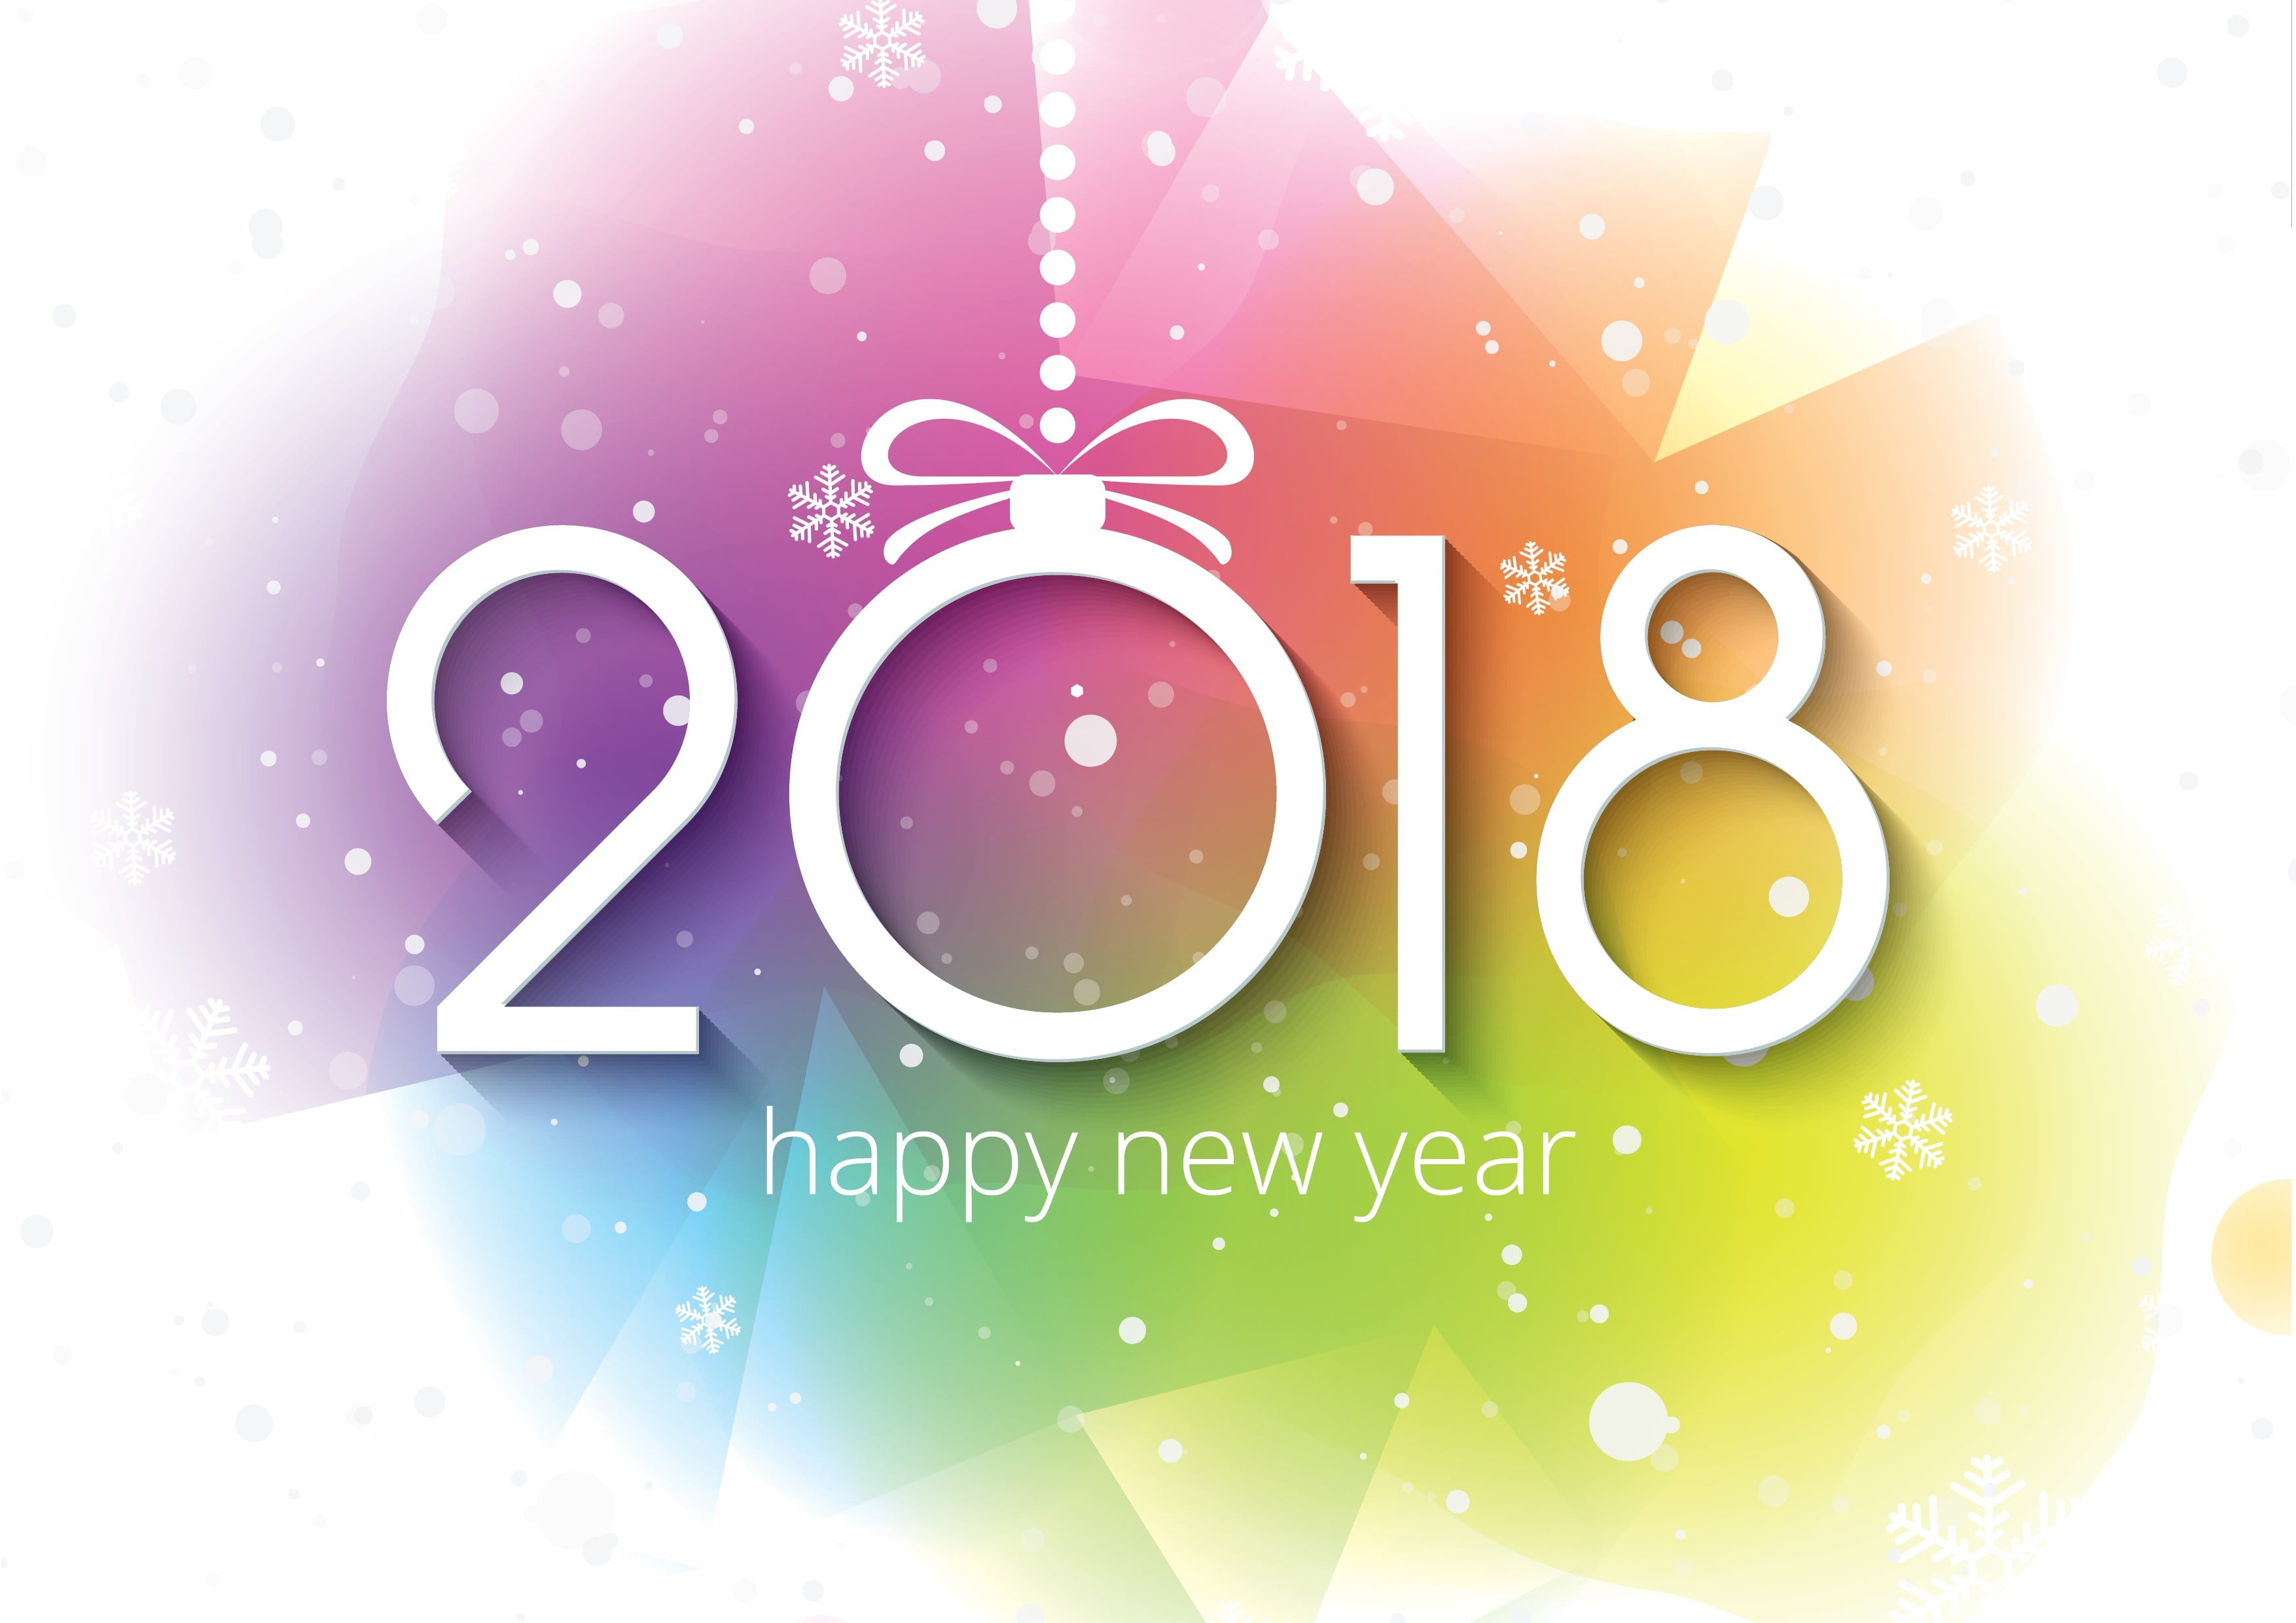 happy new year 2018 wallpapers,text,circle,illustration,font,graphic design